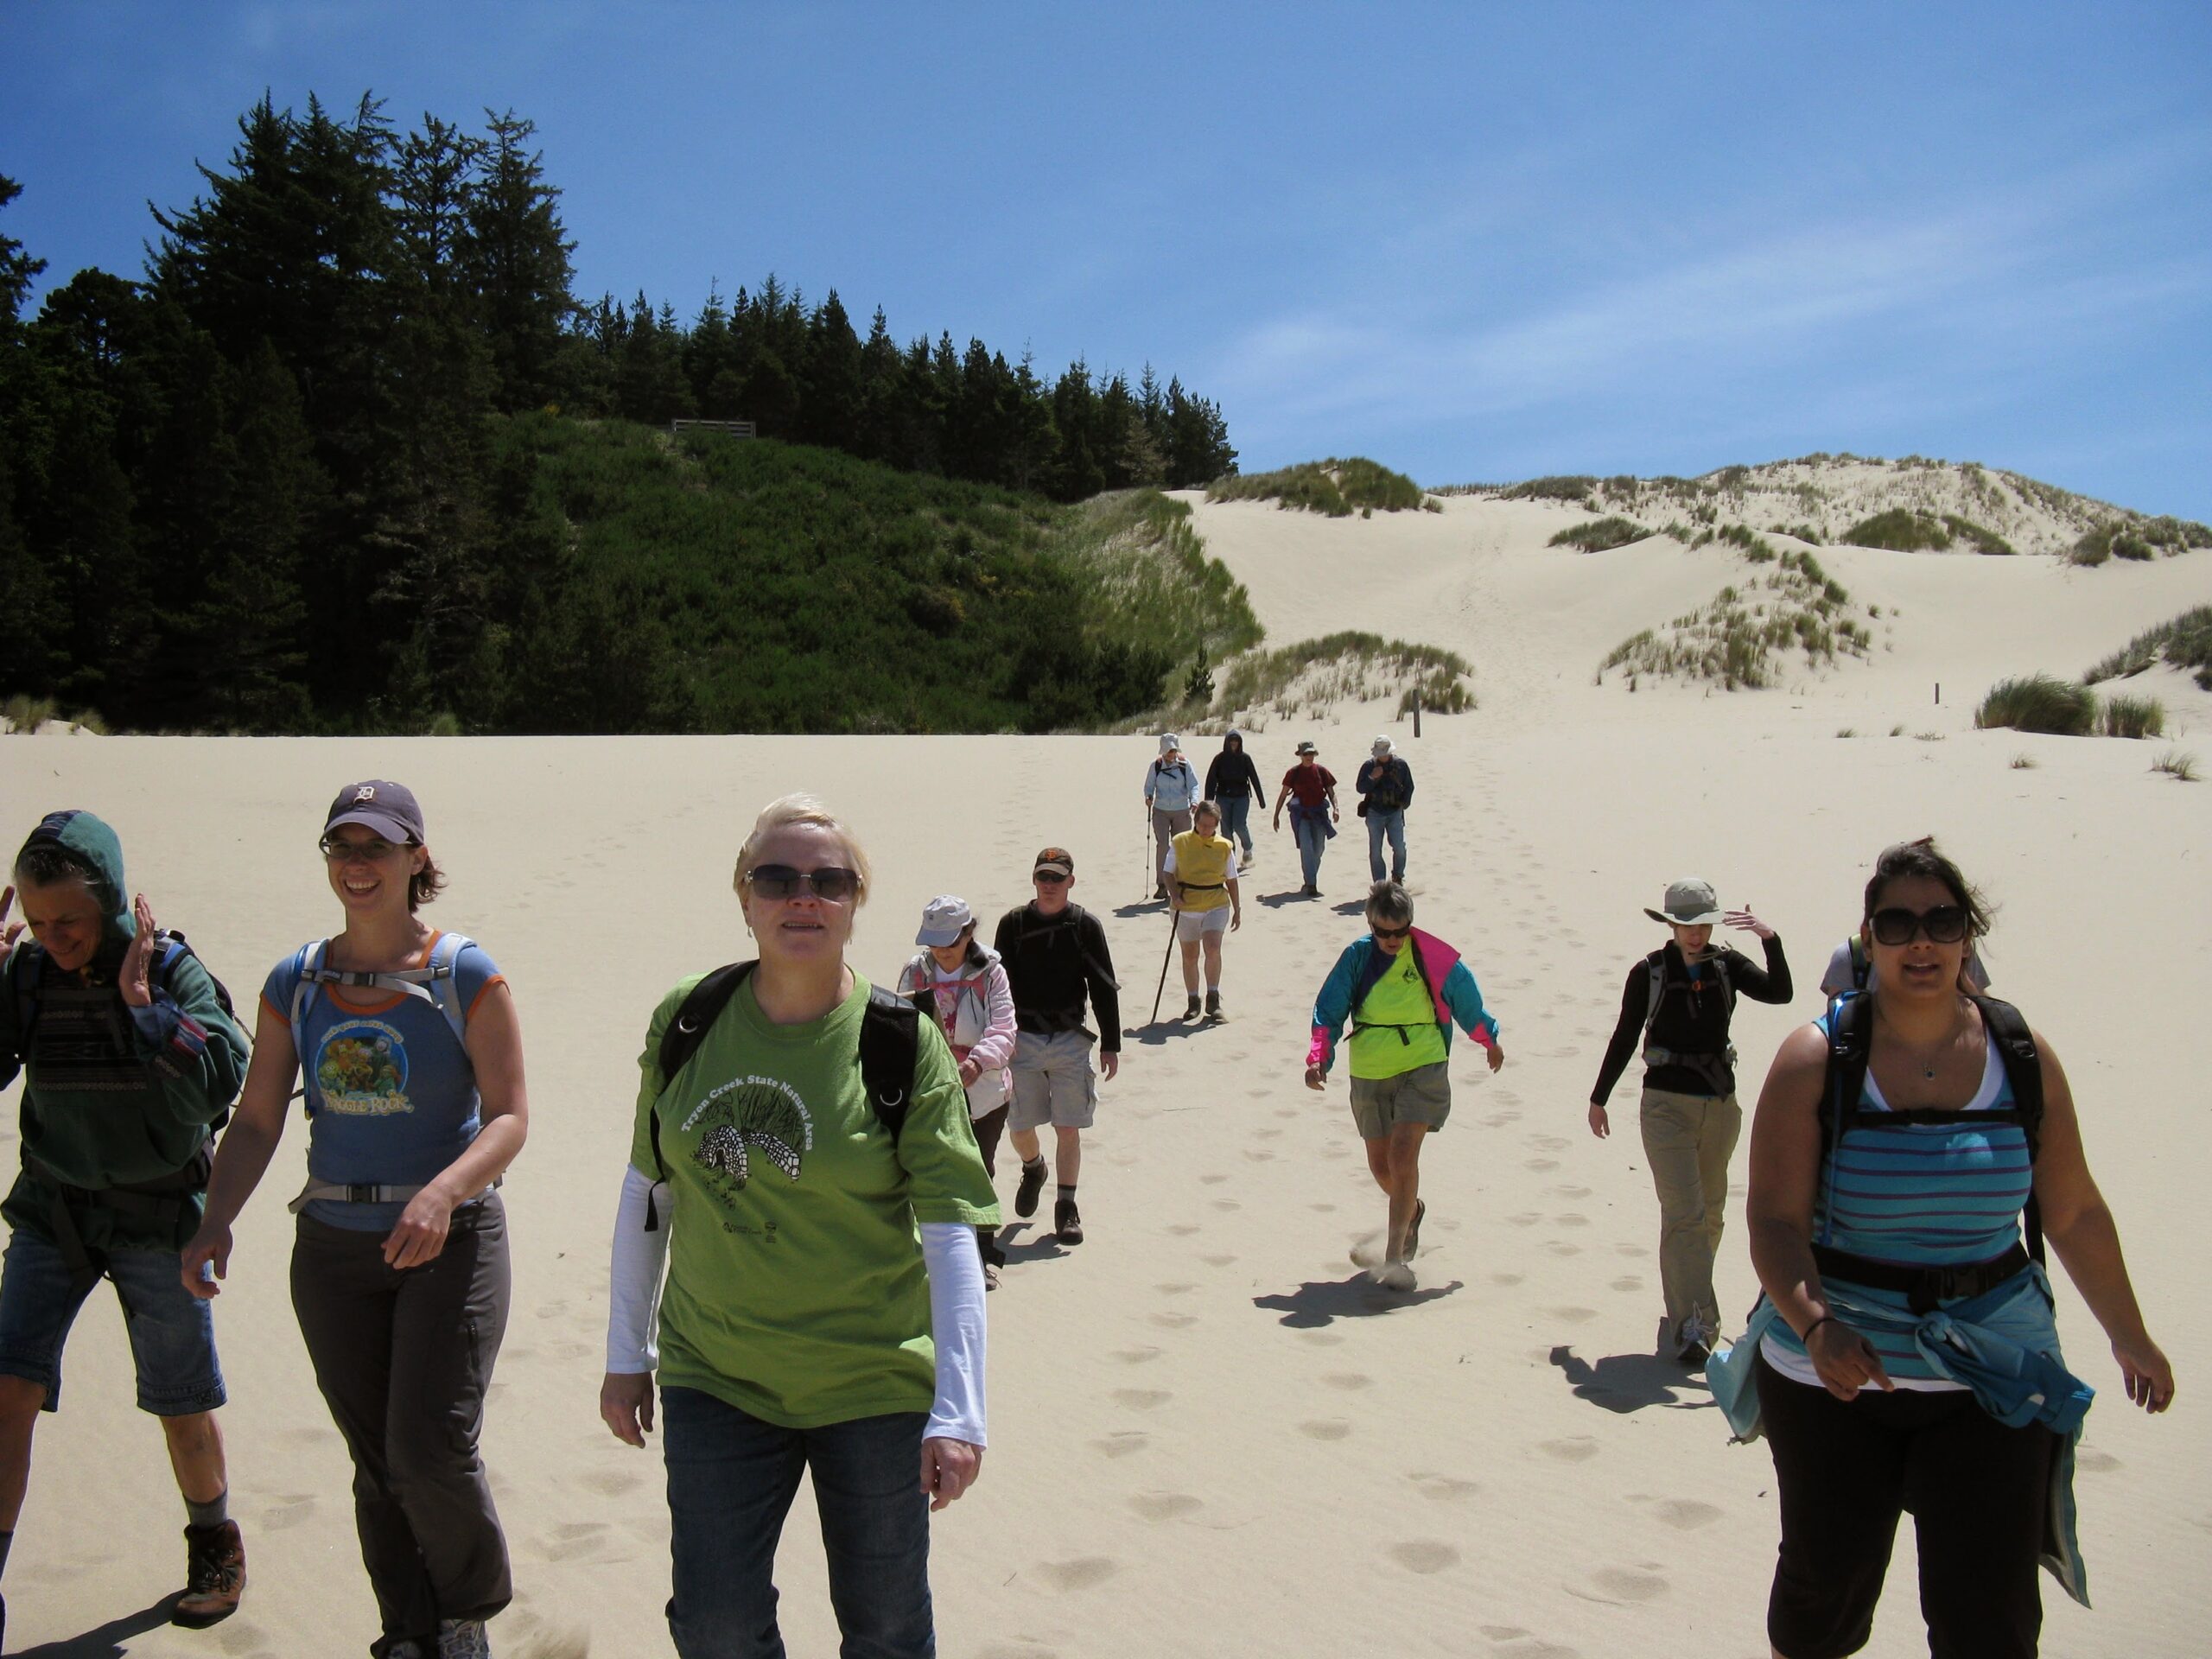 Hikers in the Oregon Dunes by Chandra LeGue